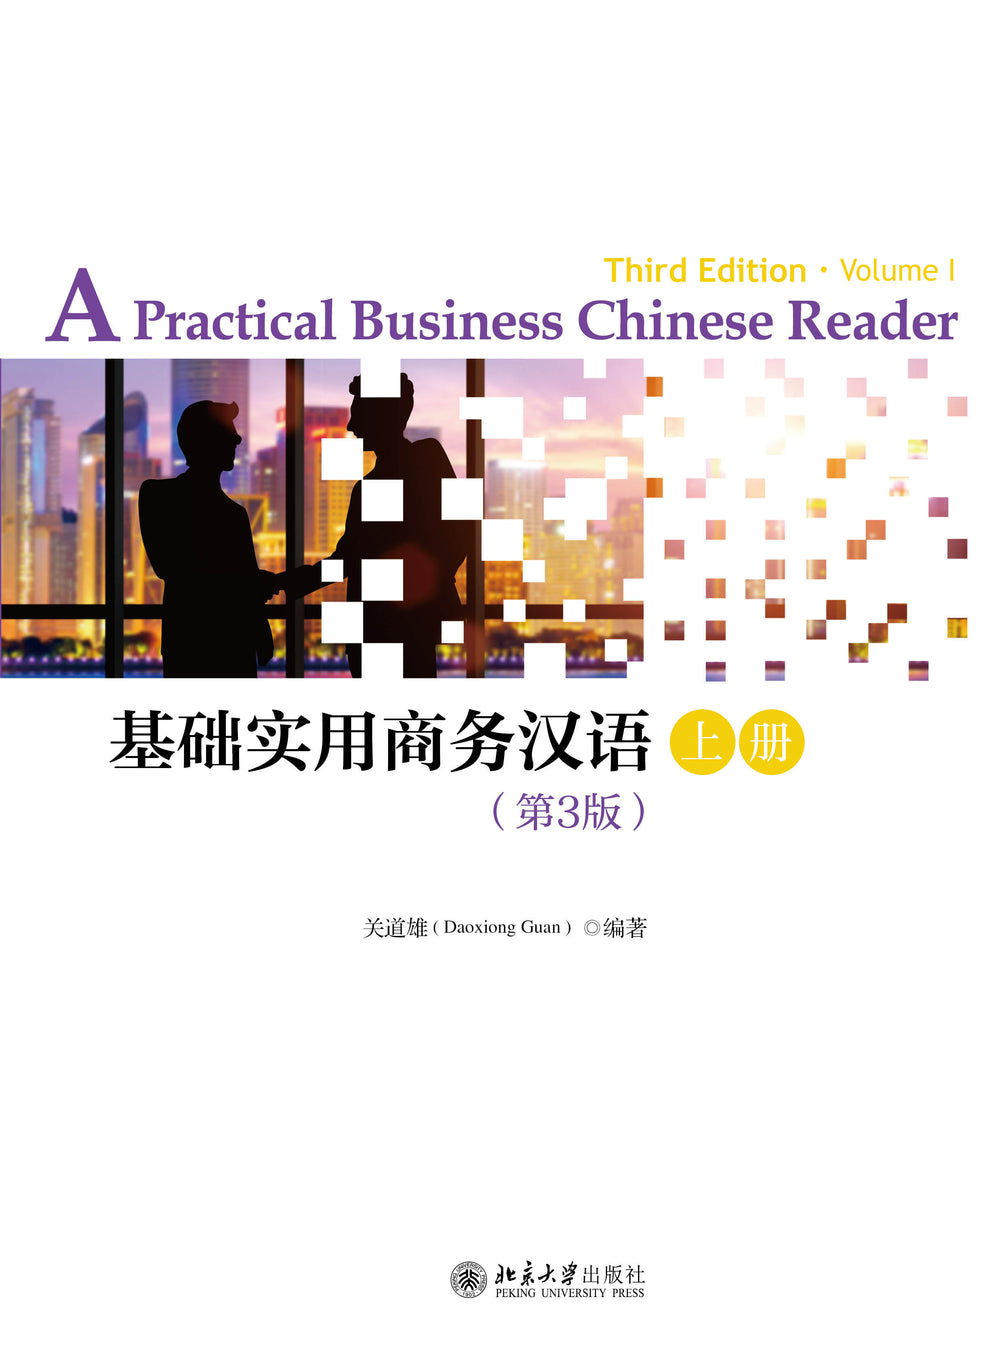 A Practical Business Chinese Reader (3rd Edition) 基础实用商务汉语（第3版）